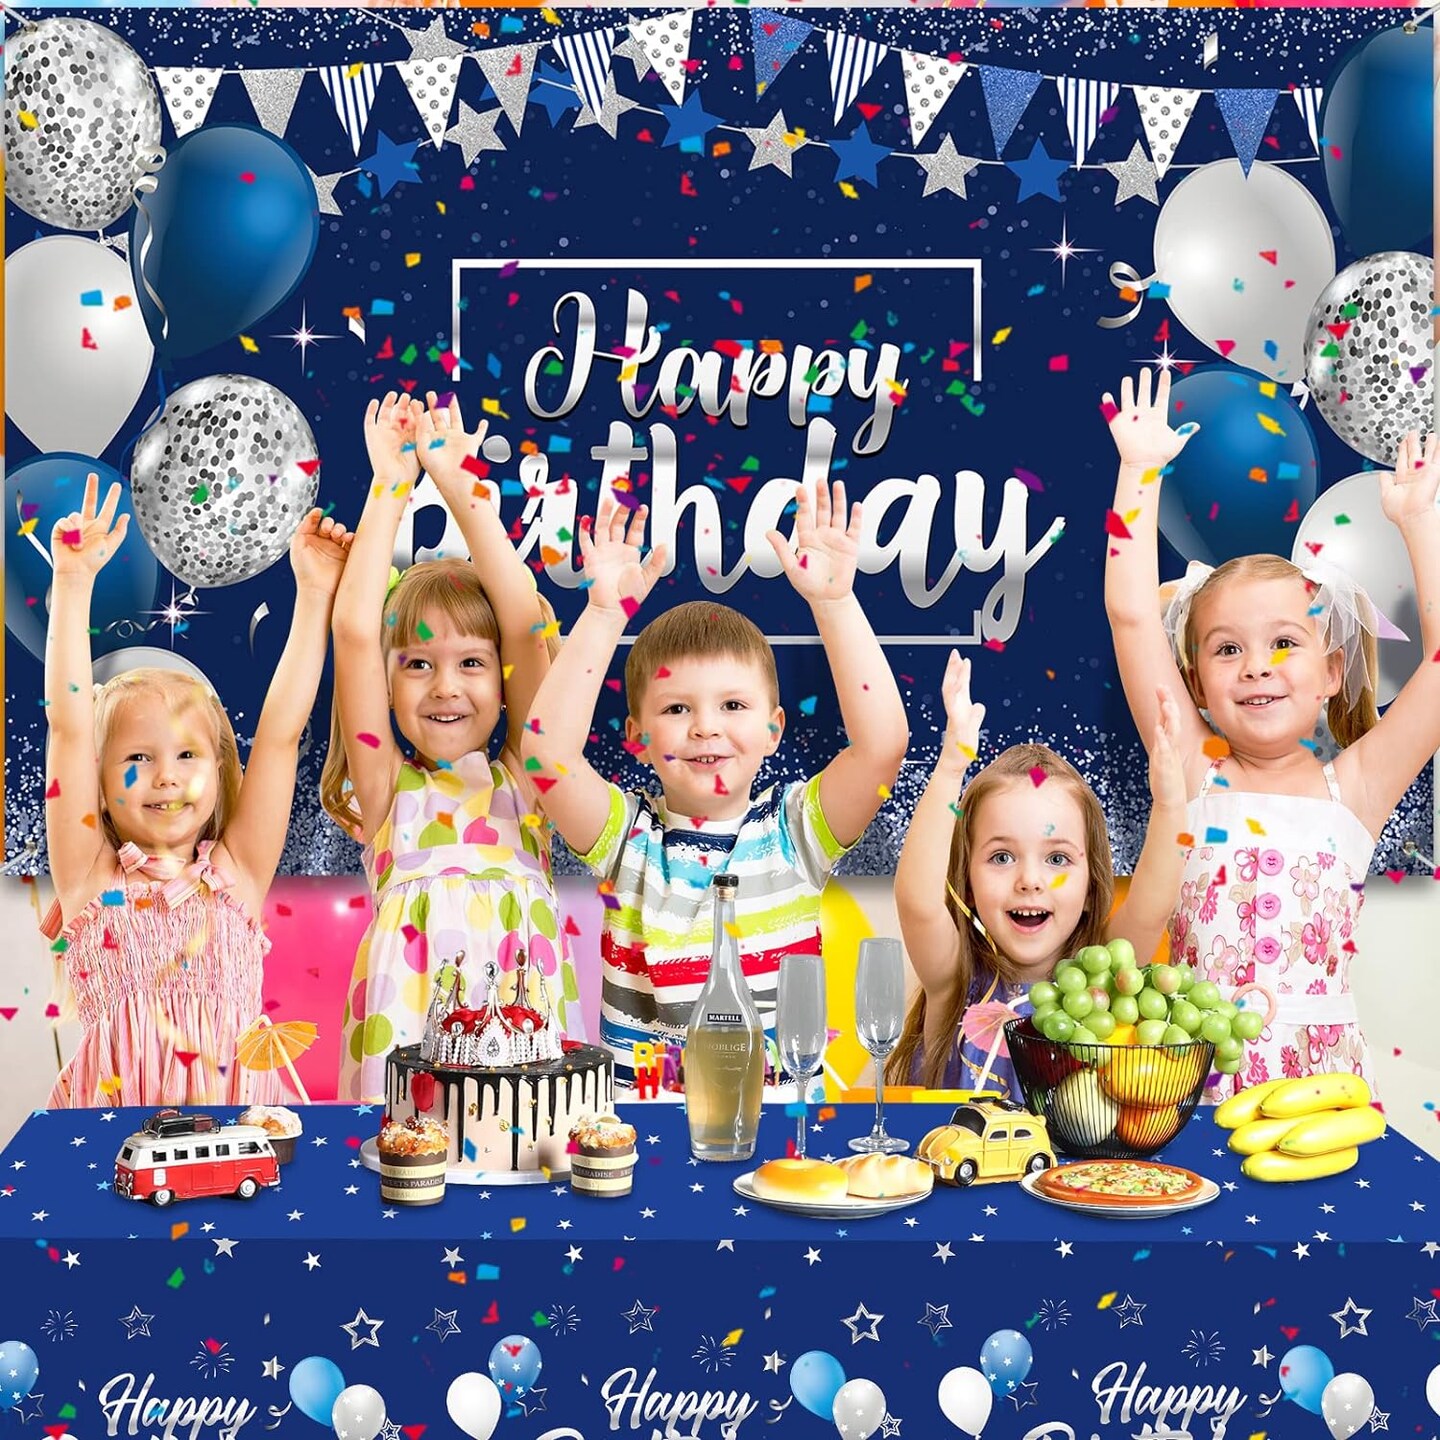 Navy Blue Birthday Party Decorations Blue Confetti Balloons Kit Happy Birthday Photography Backdrop Banner Tablecloths for Boys Girls Men Women Birthday Party Supplies Decor (Navy Blue and Silver)